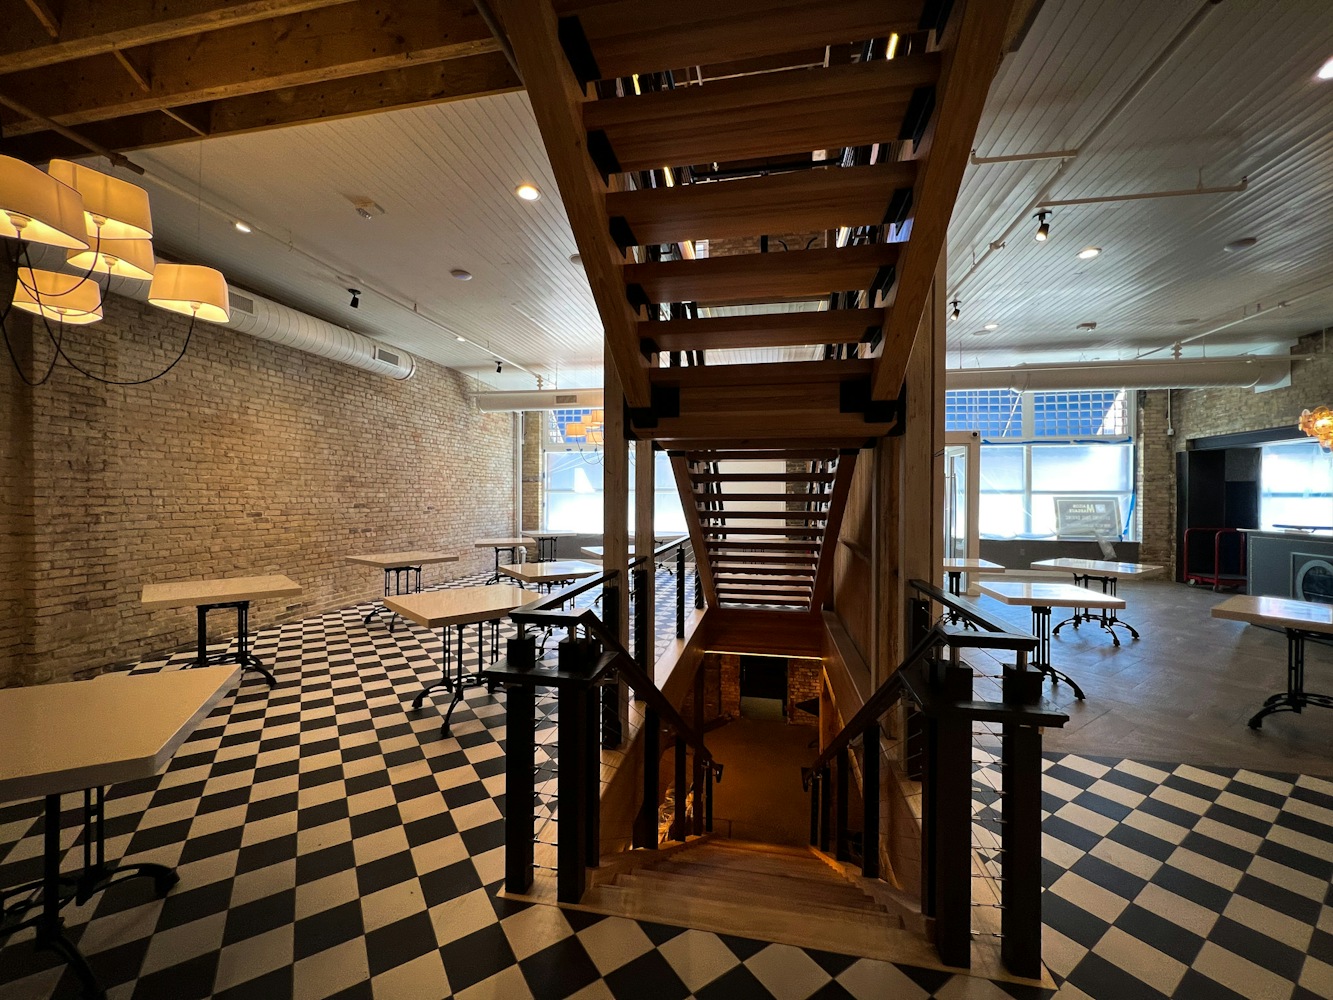 Central Staircase leading To Underground Bar